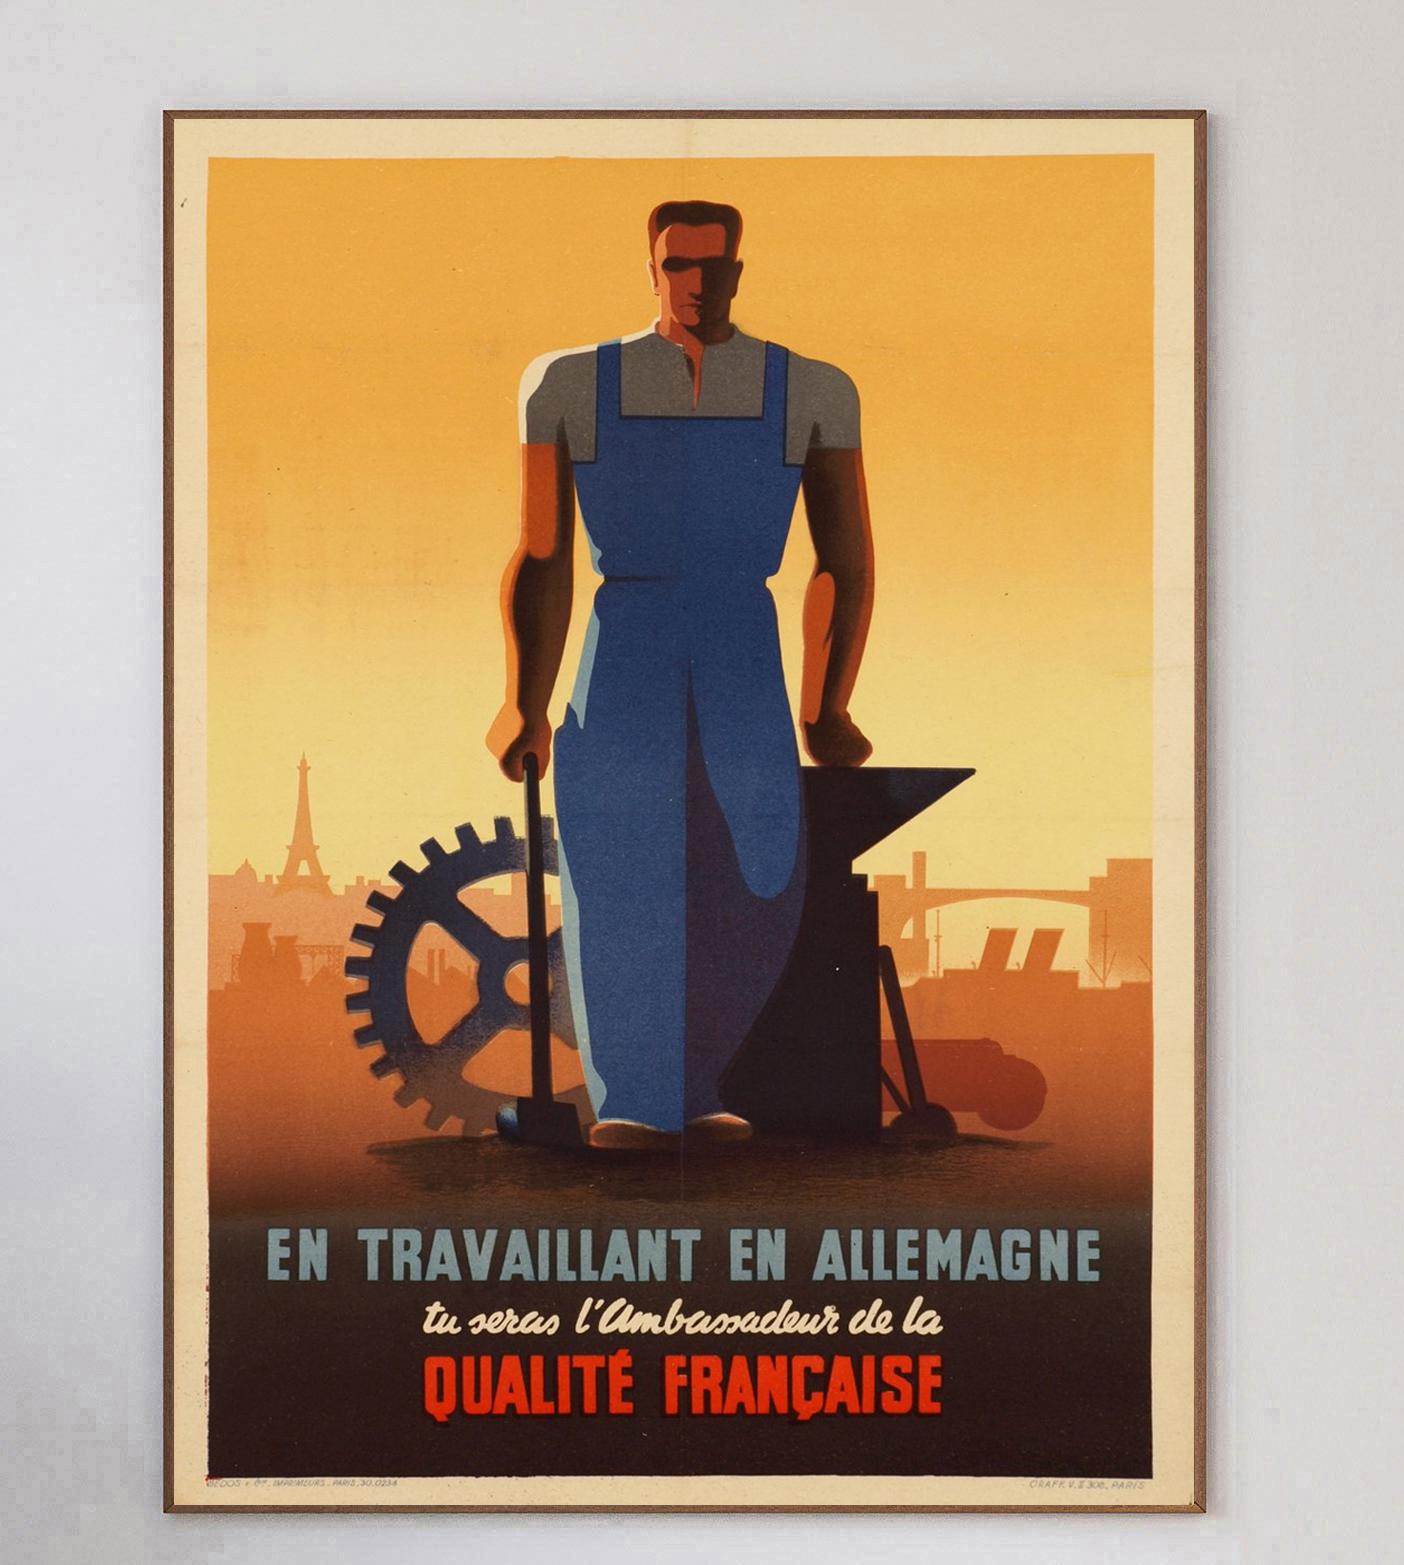 Beautiful rare poster urging people to go to Germany and be the ambassador of French quality or 